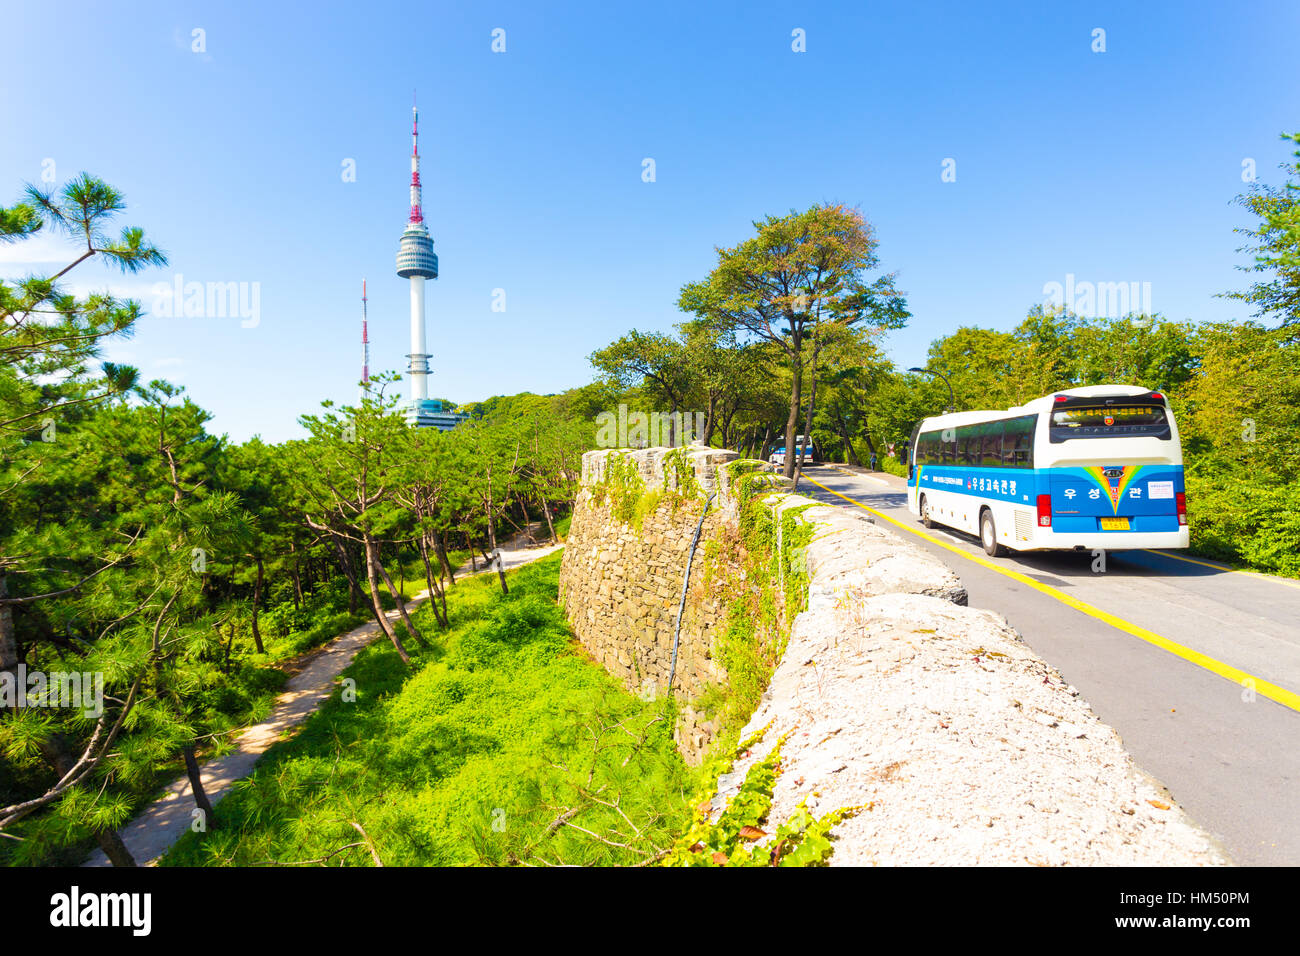 Tourist bus traveling on street along the old city wall with view of YTN Seoul Tower broadcast antenna on Namsan mountain Stock Photo